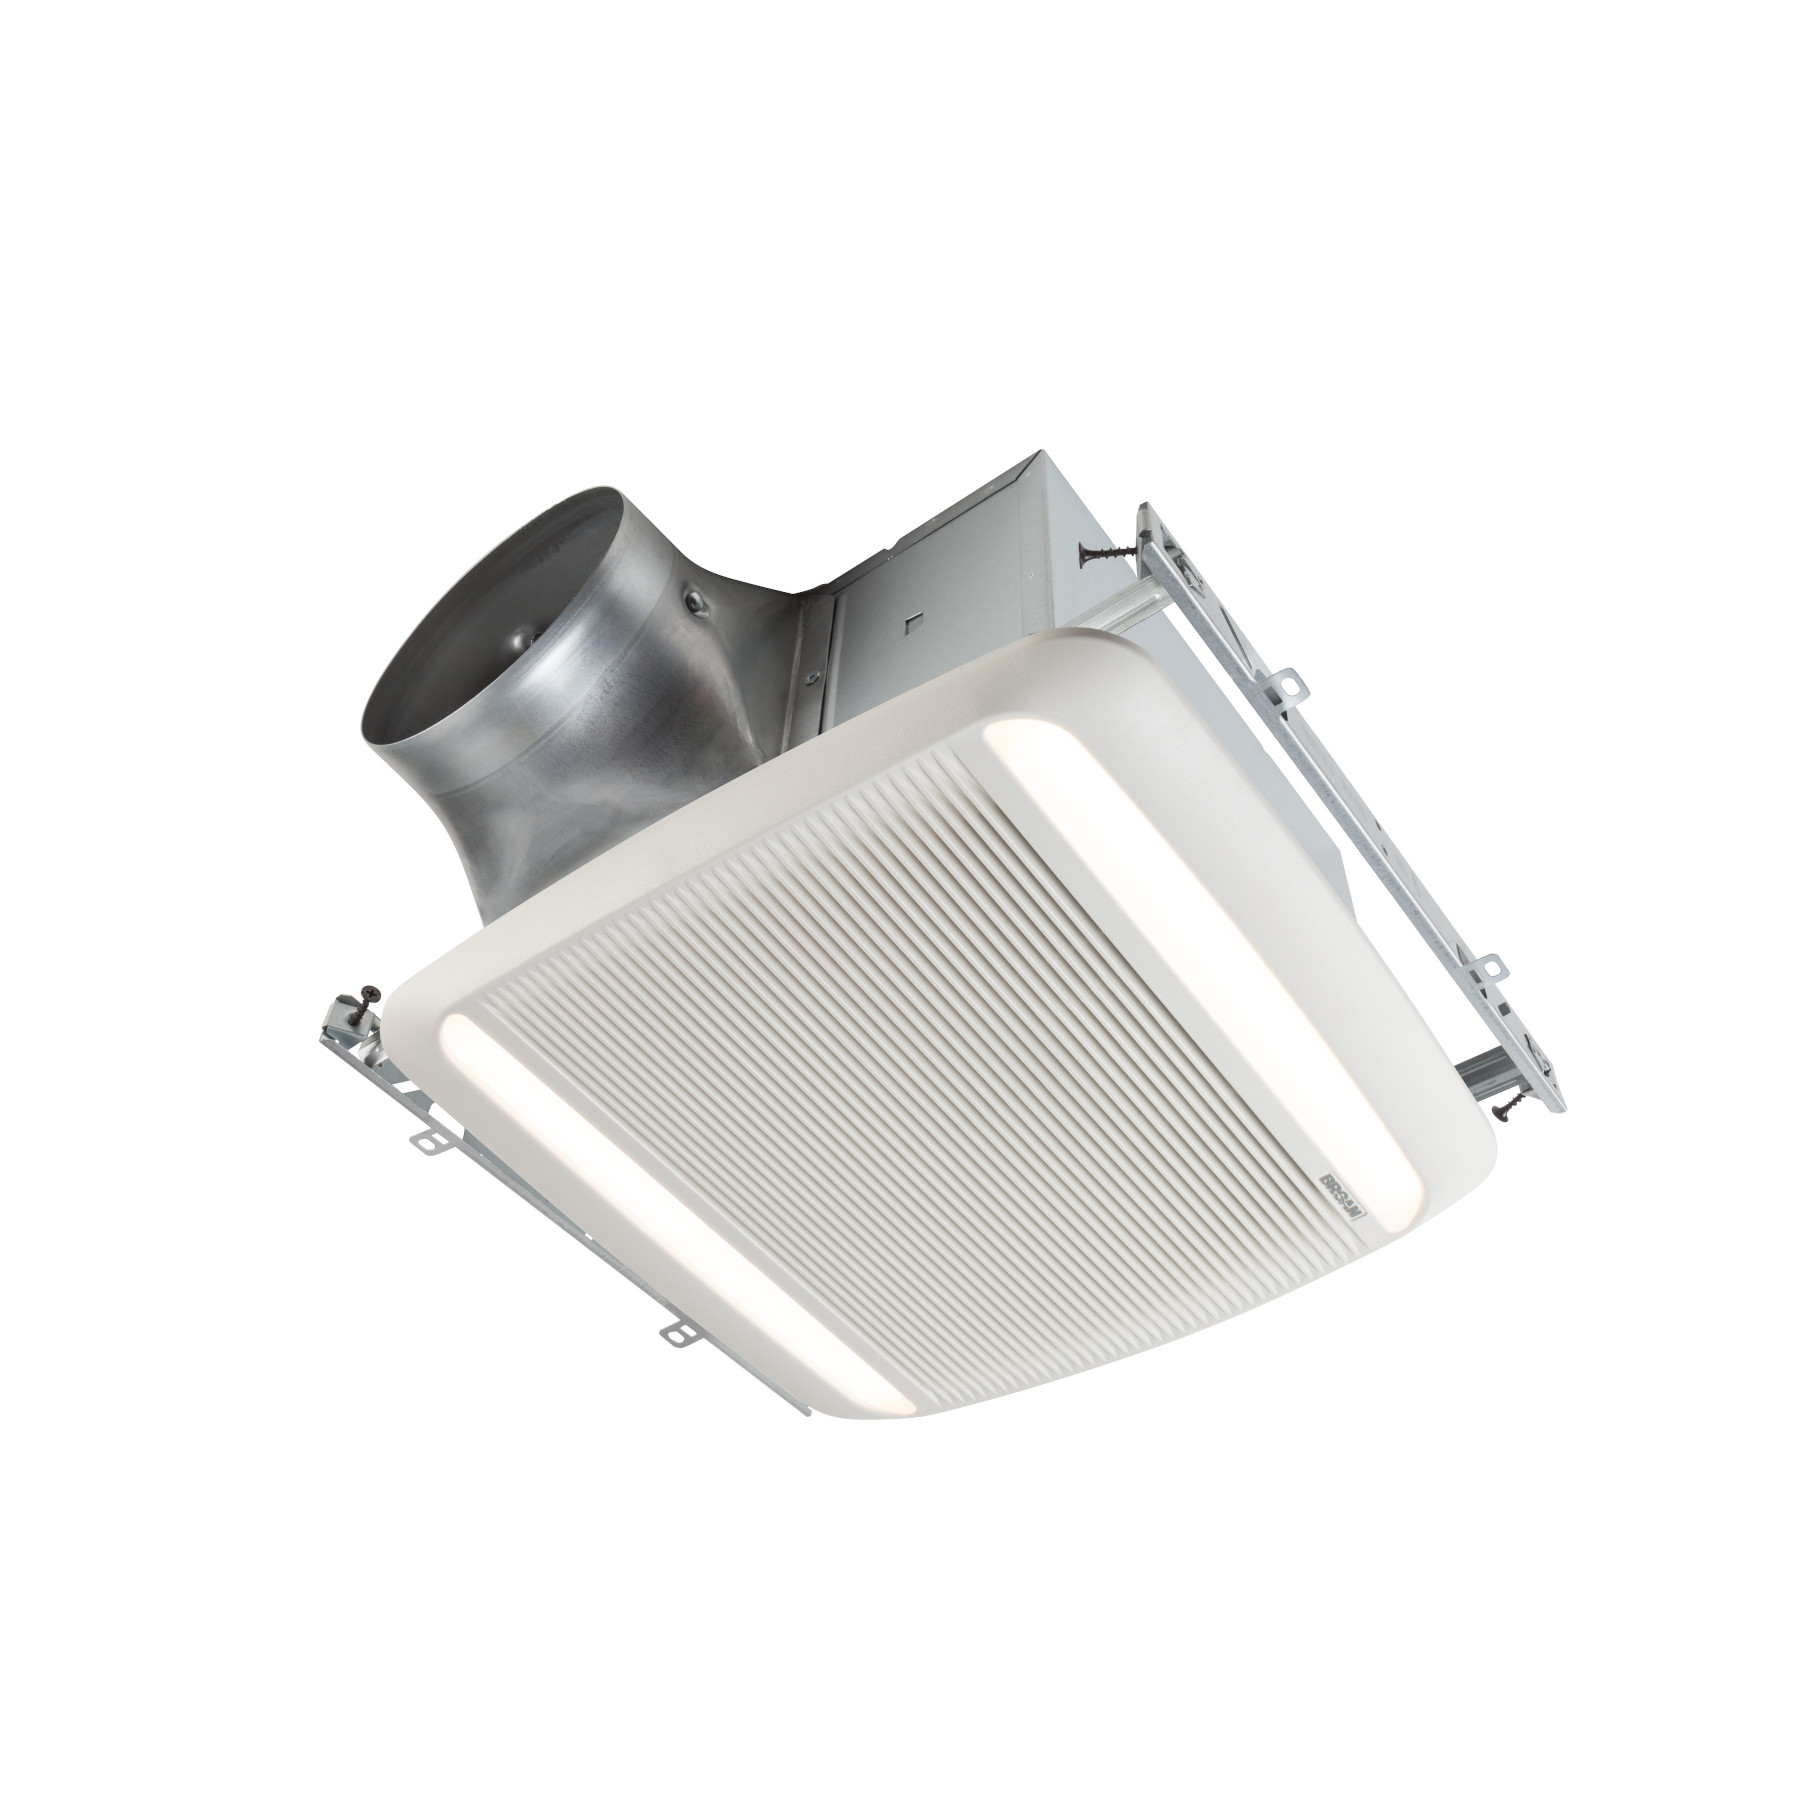 ULTRA GREEN XB Series 110 CFM Ceiling Bathroom Exhaust Fan with LED Light, ENERGY STAR® certified